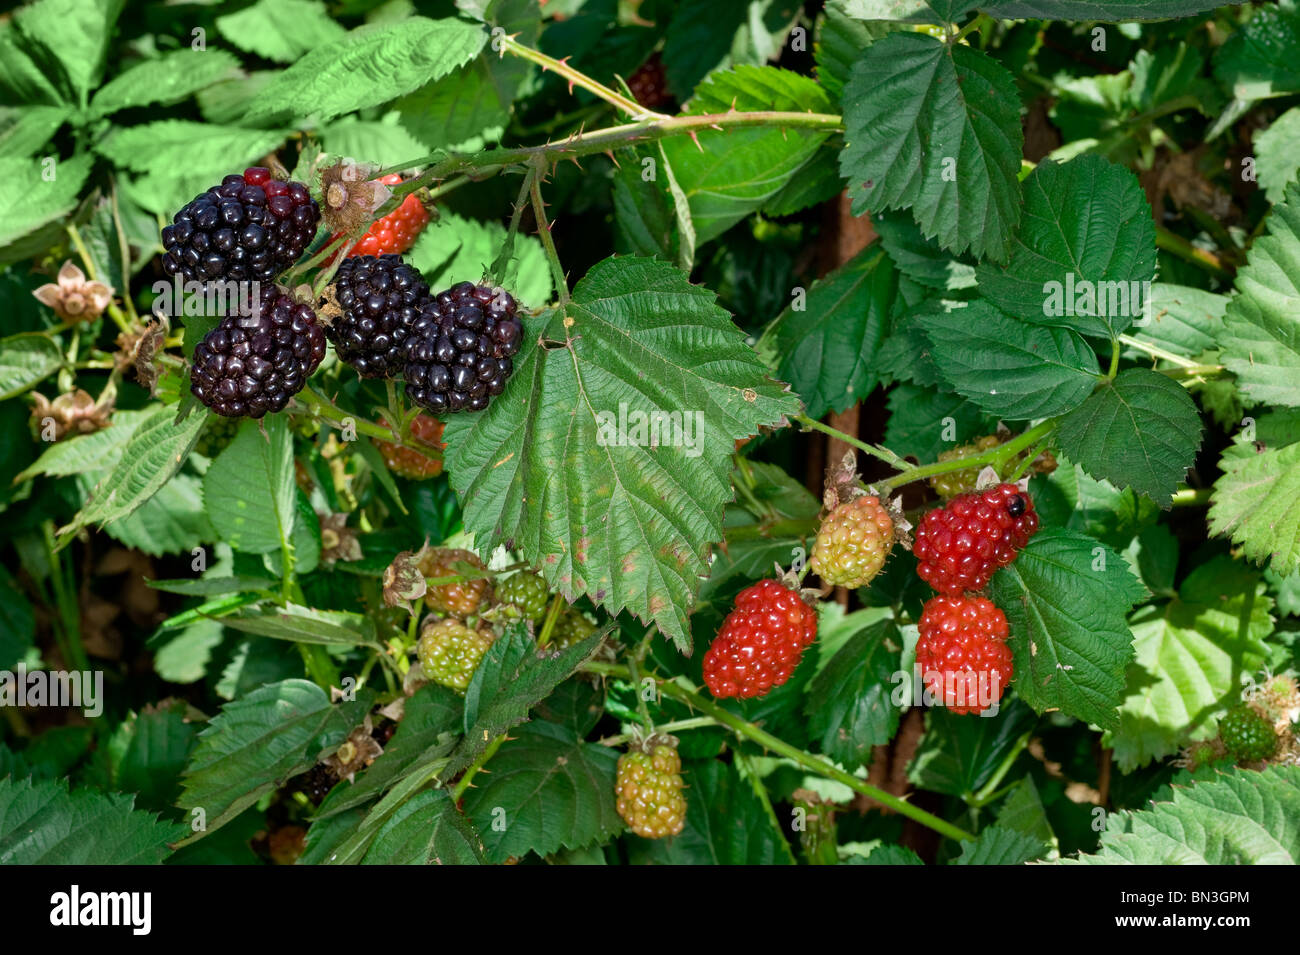 Healthy blackberry plant with vibrant green leafs on an organic fruit farm. Stock Photo